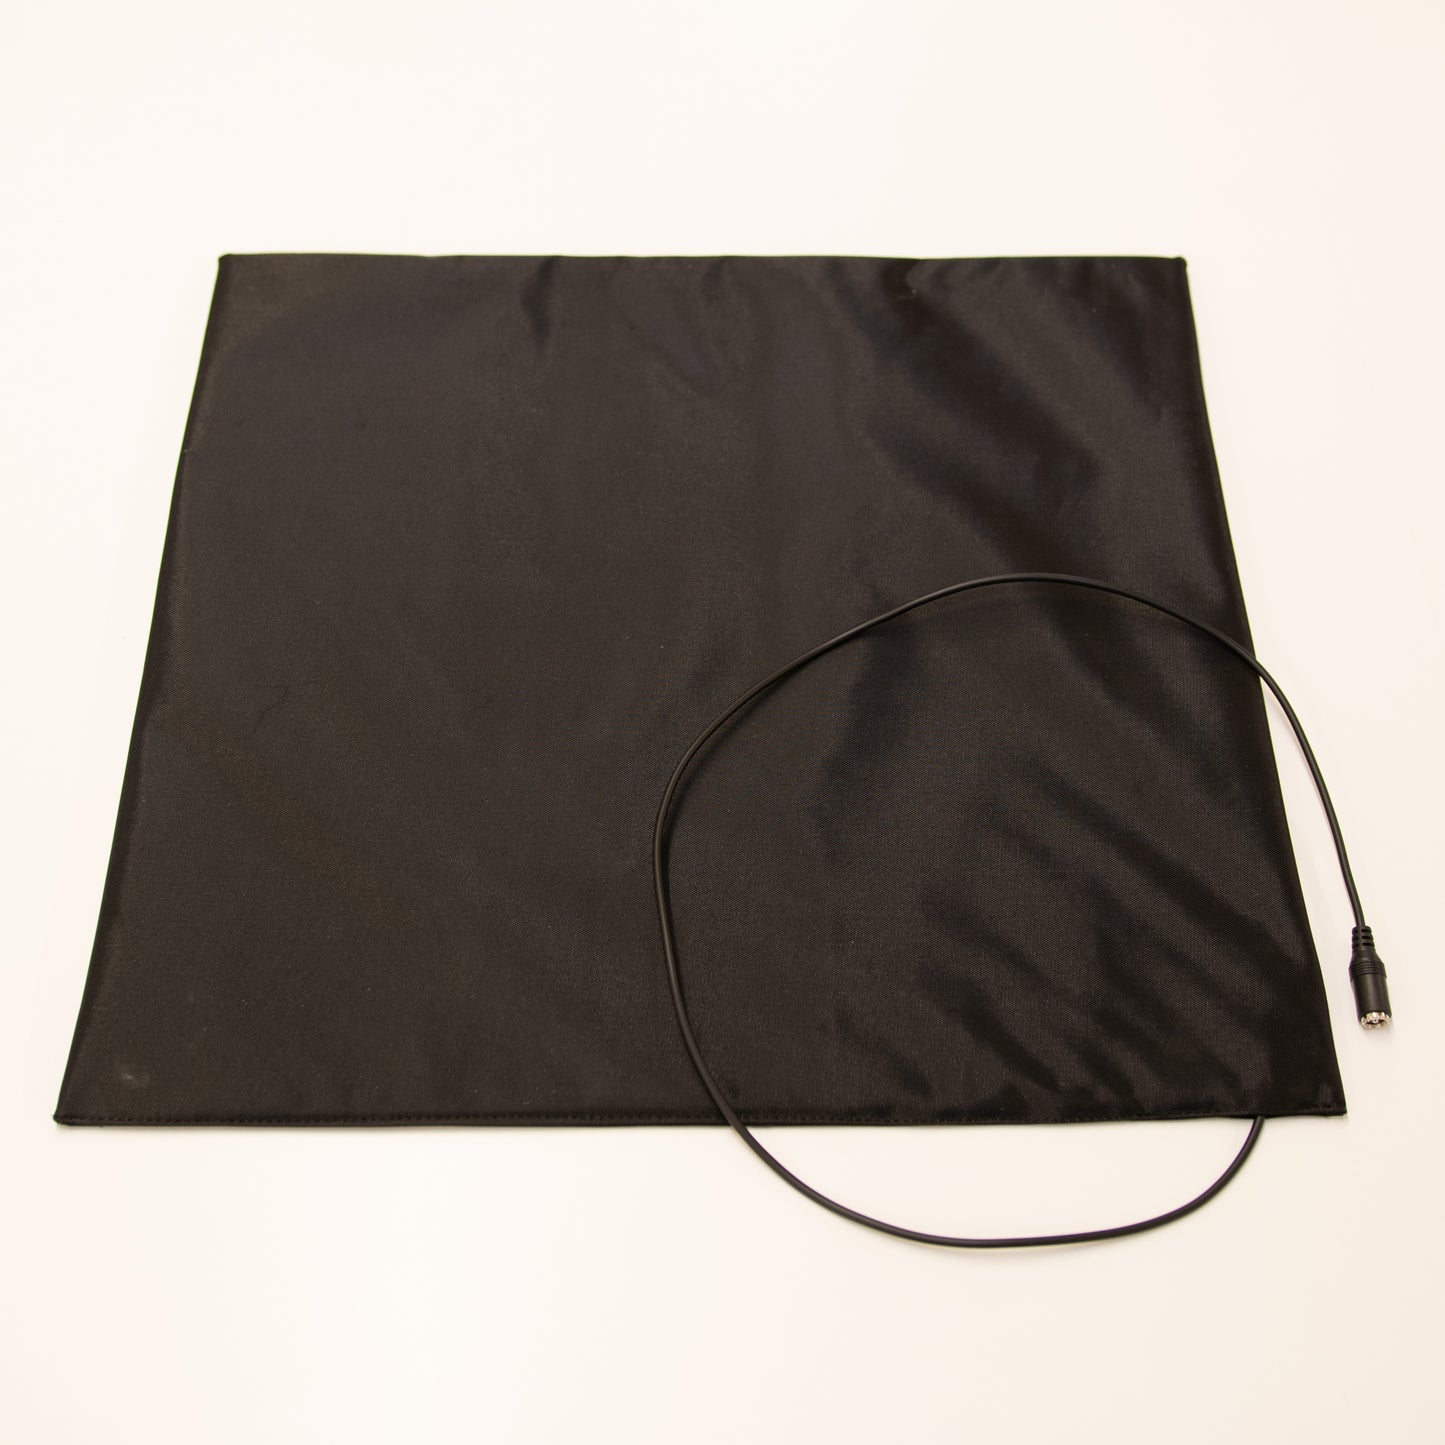 Heated Pizza Delivery Bag Complete Set, Small 12V